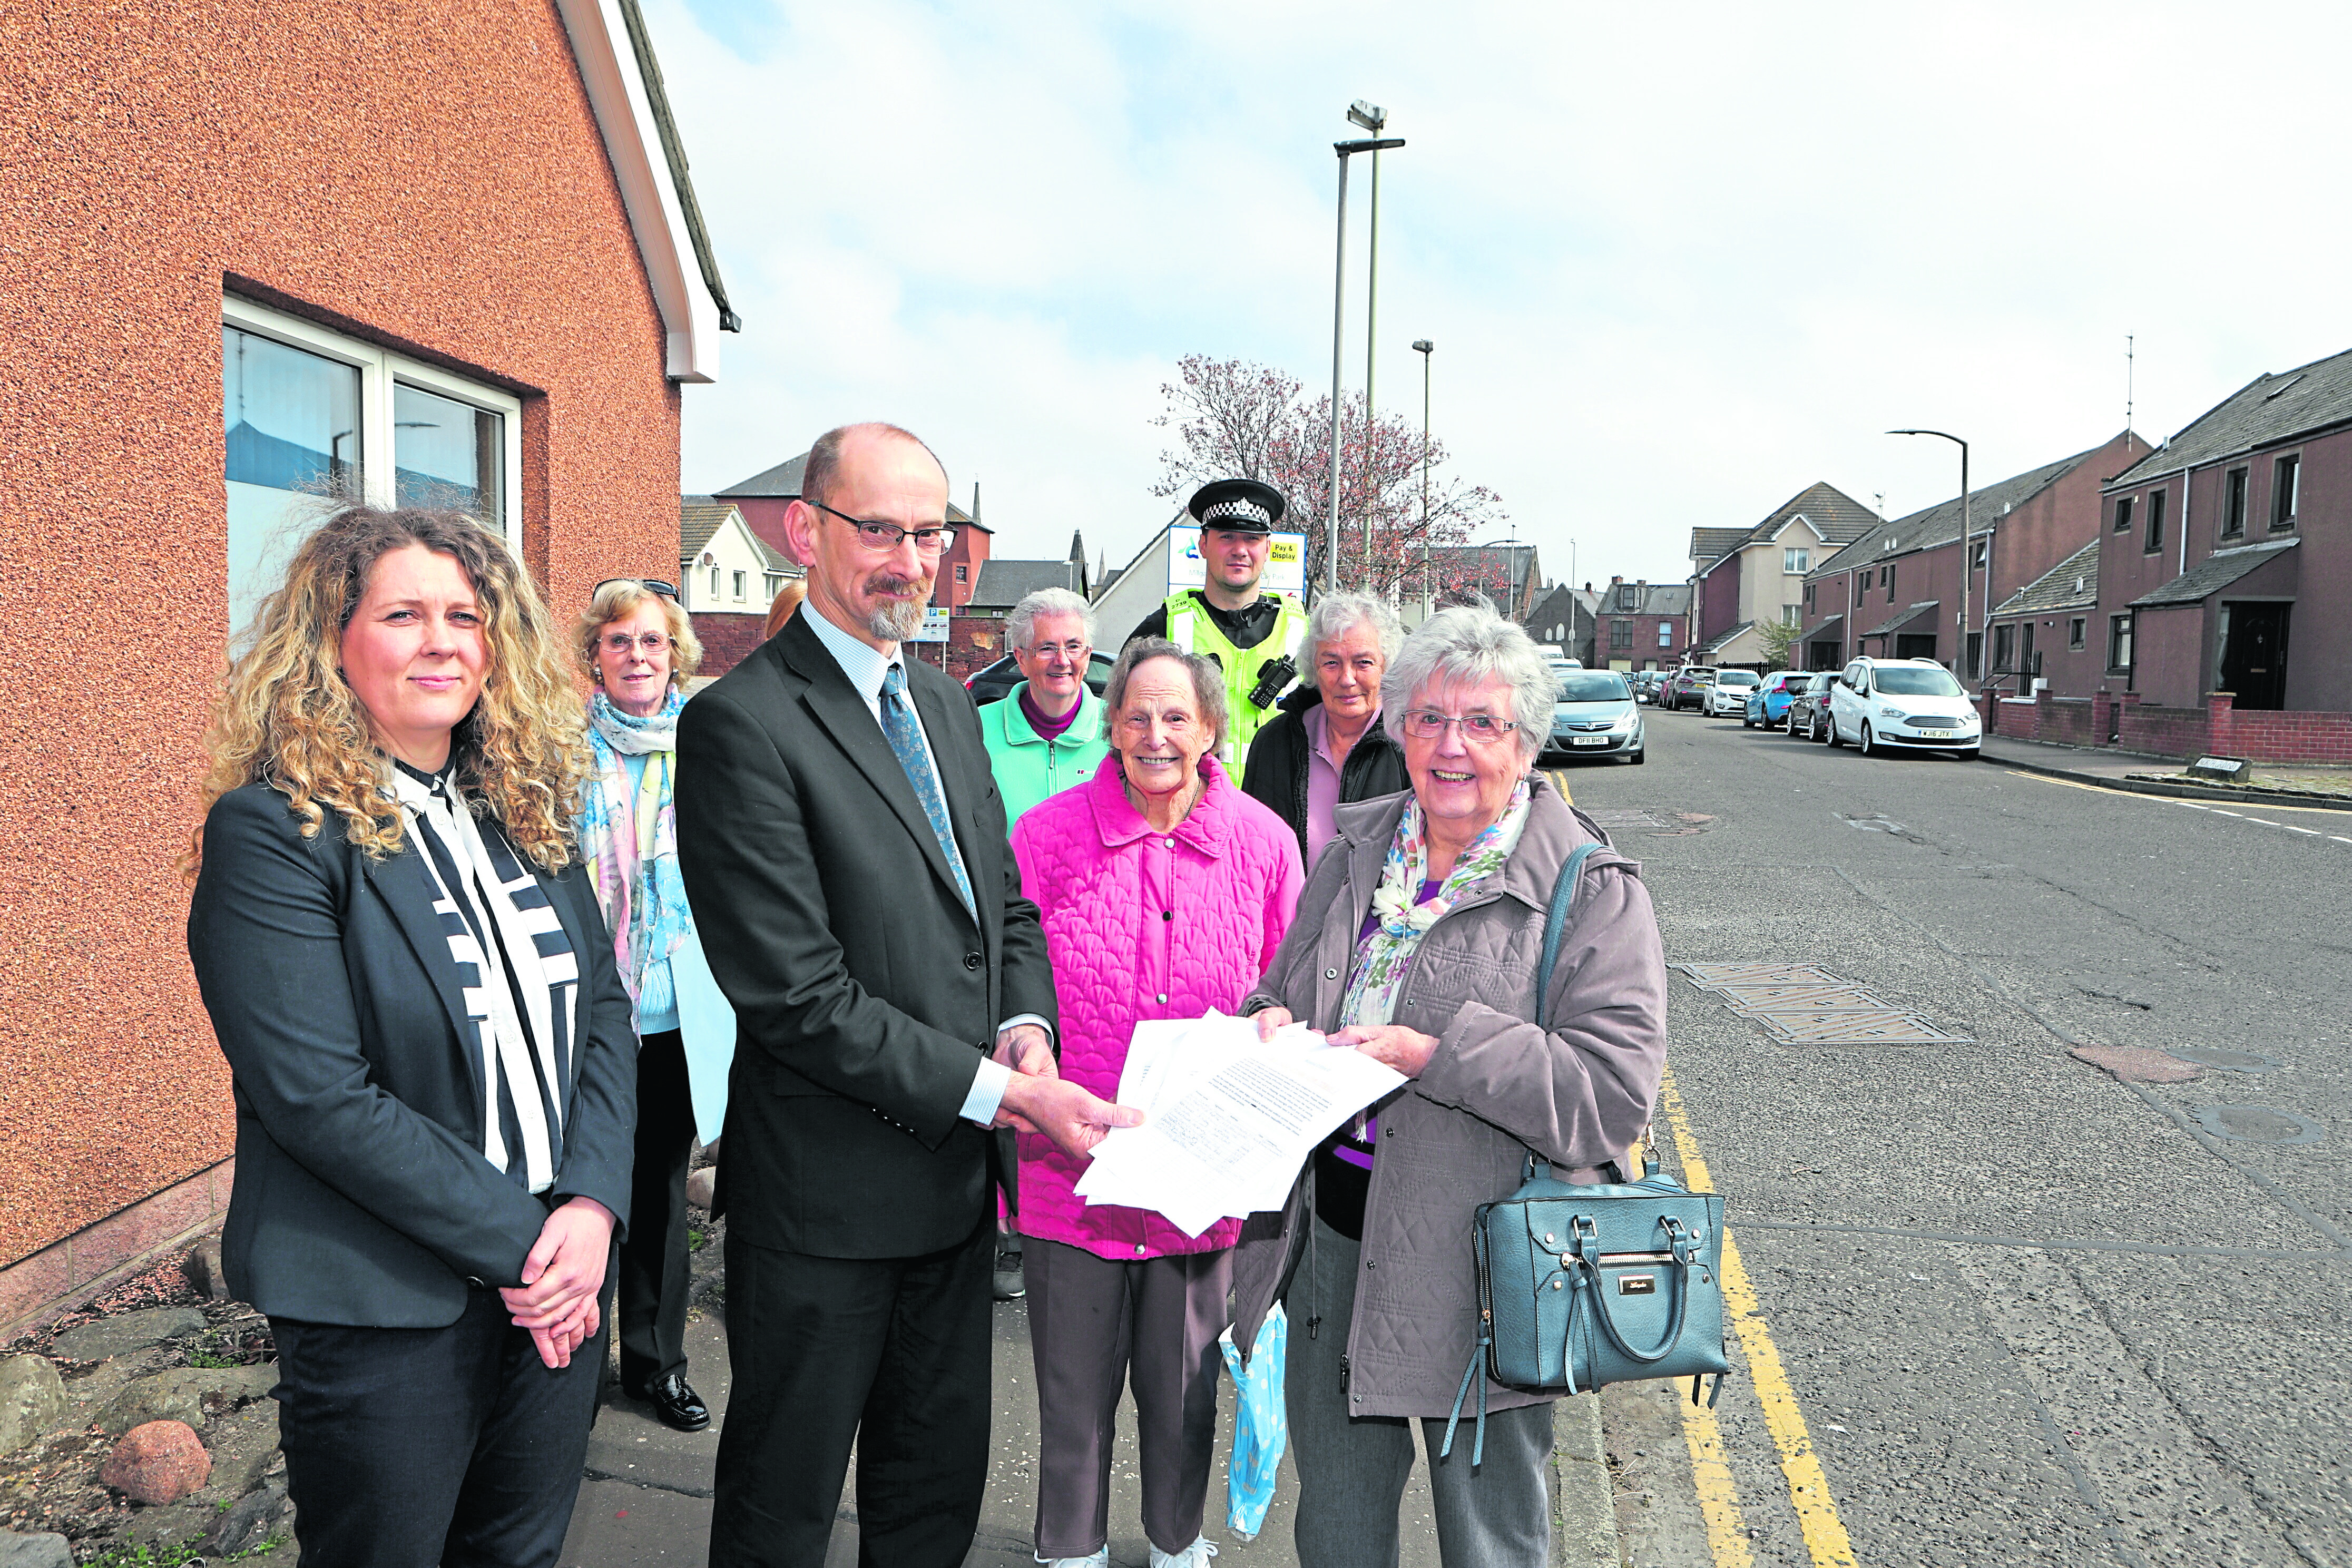 Evelyn Young and other members of the group with Lois Speed and PC David Voigt, handing a petition to Ian Cochrane , director of Infastructure Services at Angus Council